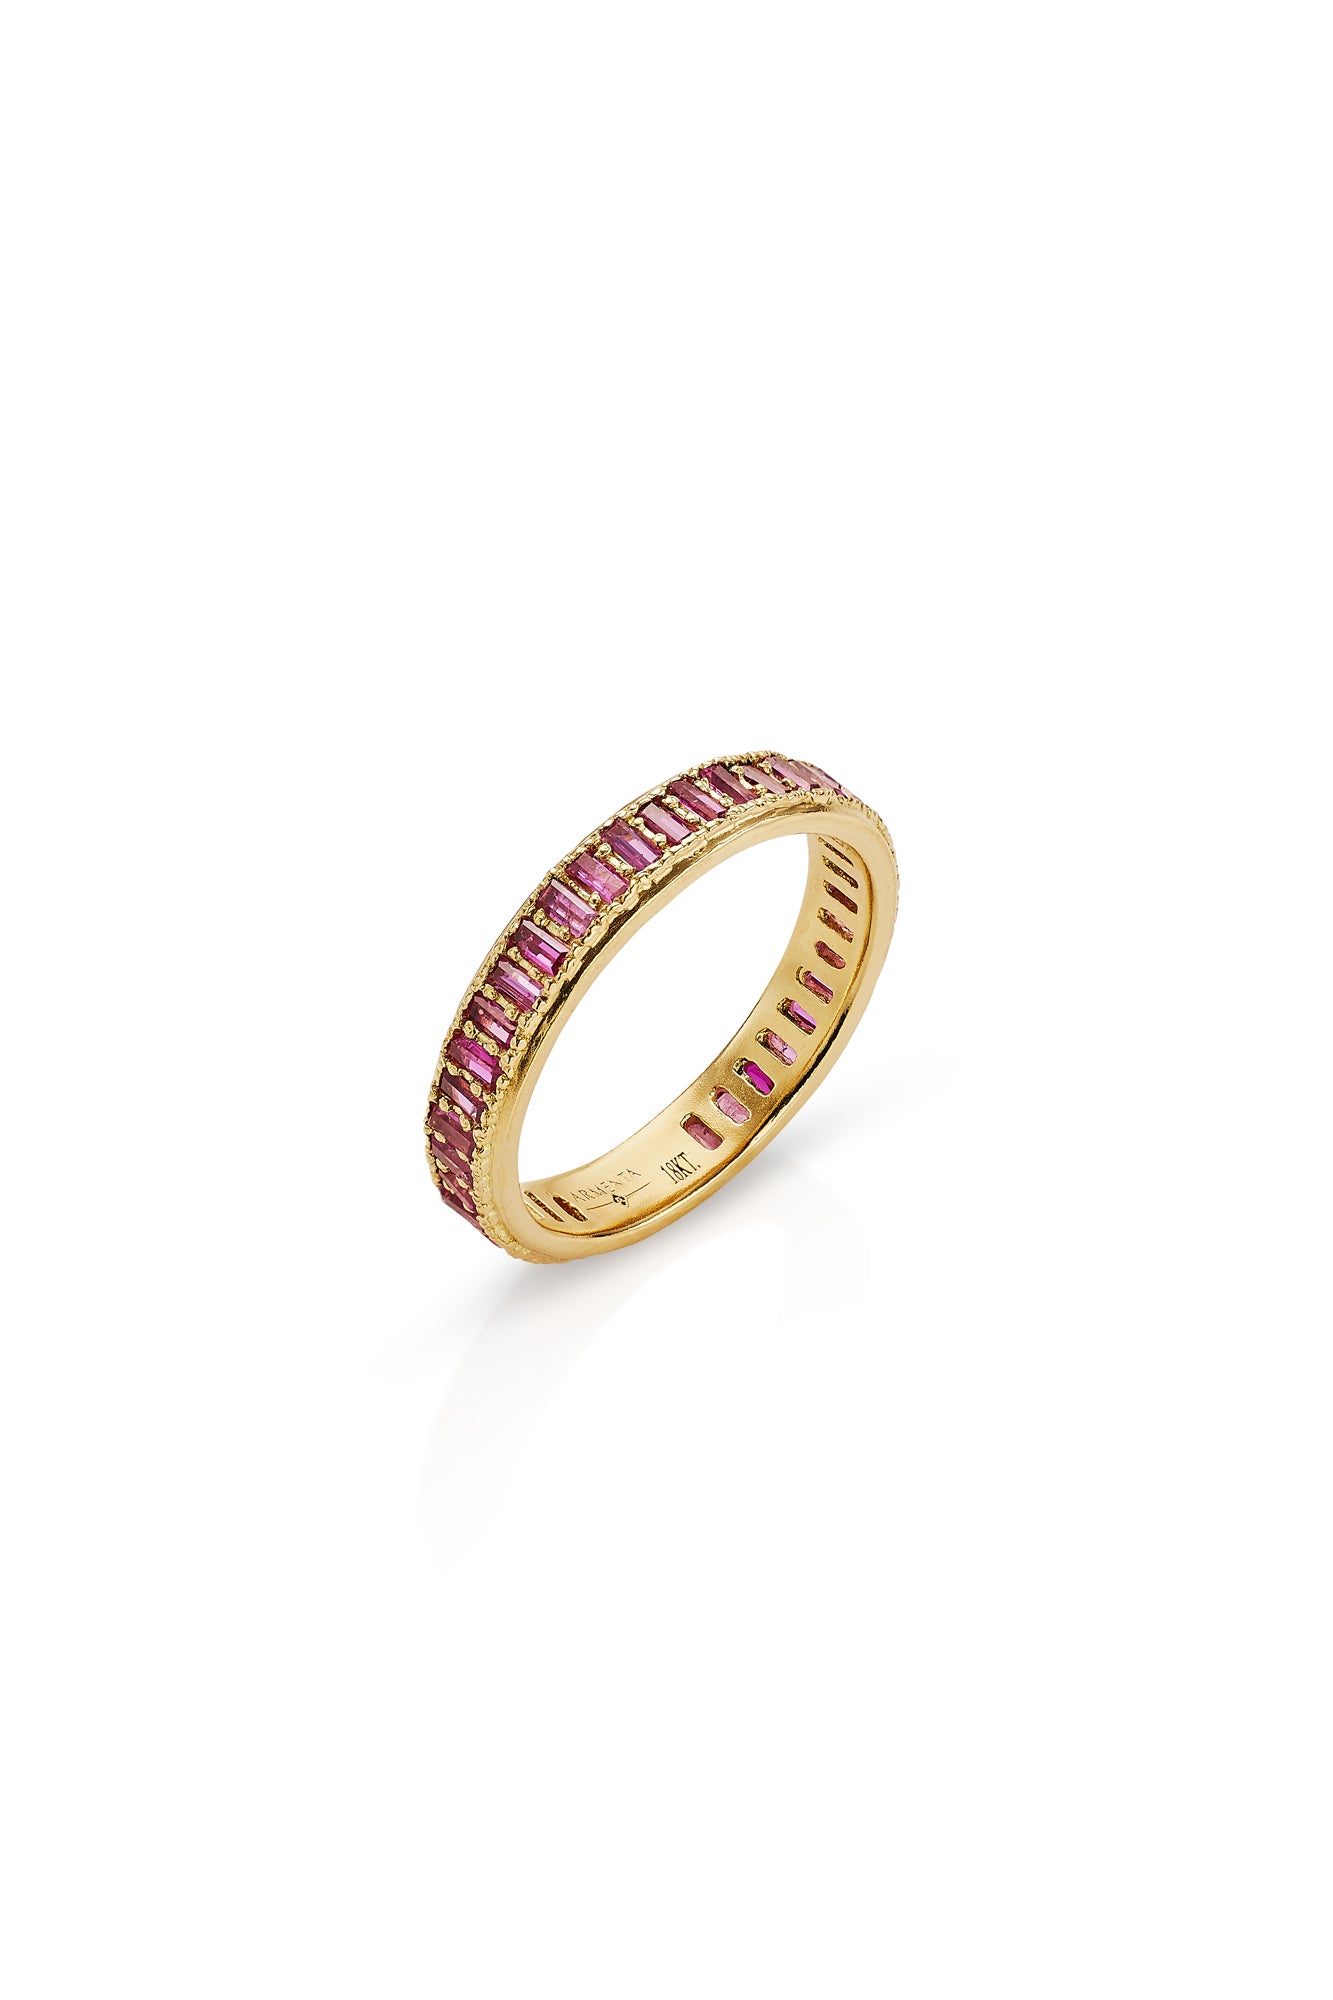 18KY Cuento Pink Sapphire Baguette Ring